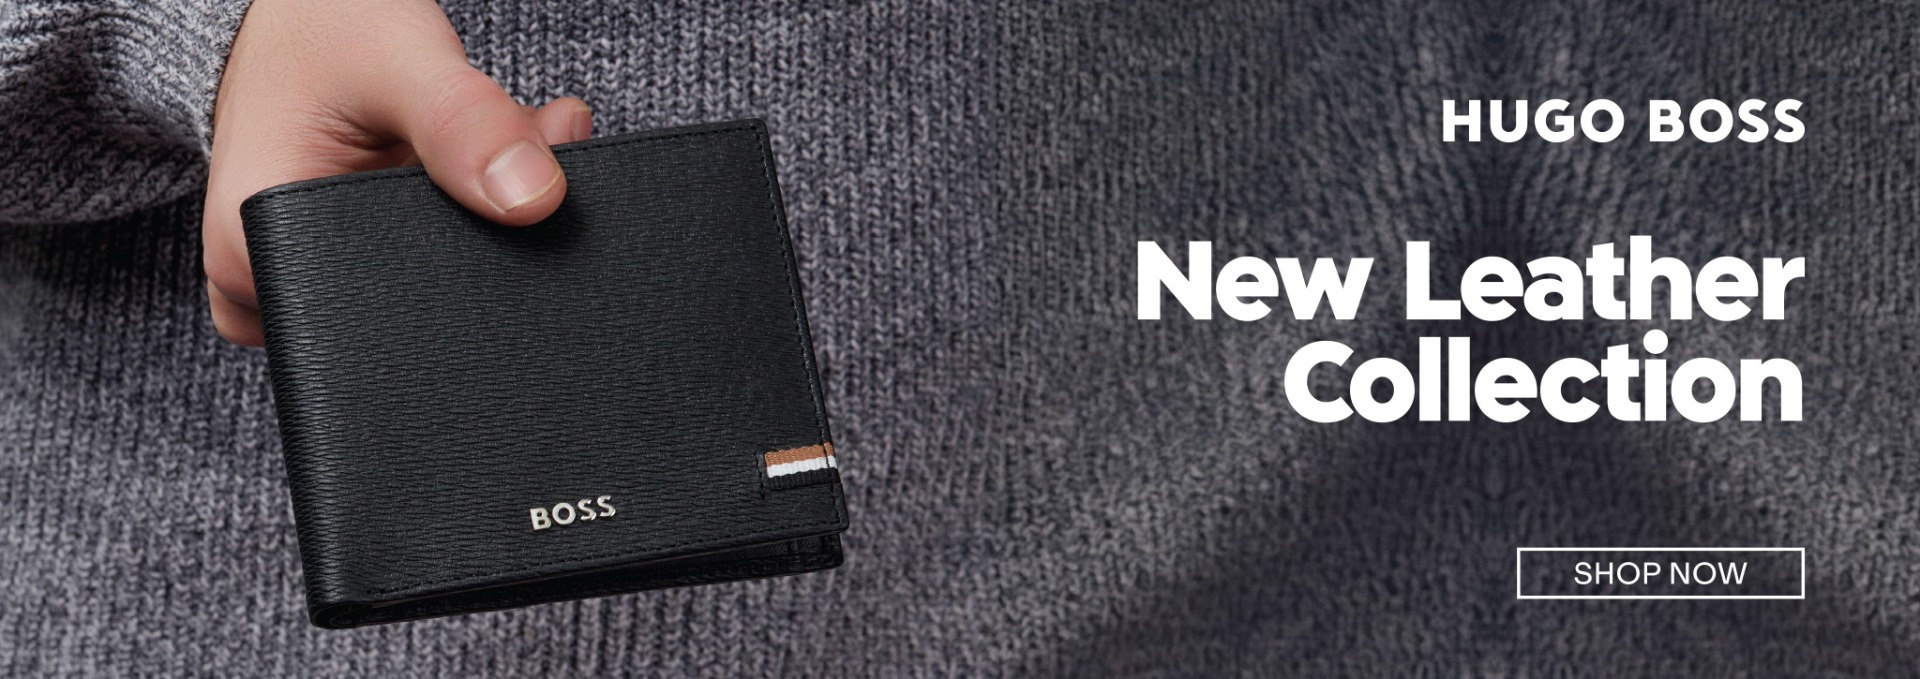 HUGO BOSS, NEW LEATHER COLLECTION, SHOP NOW